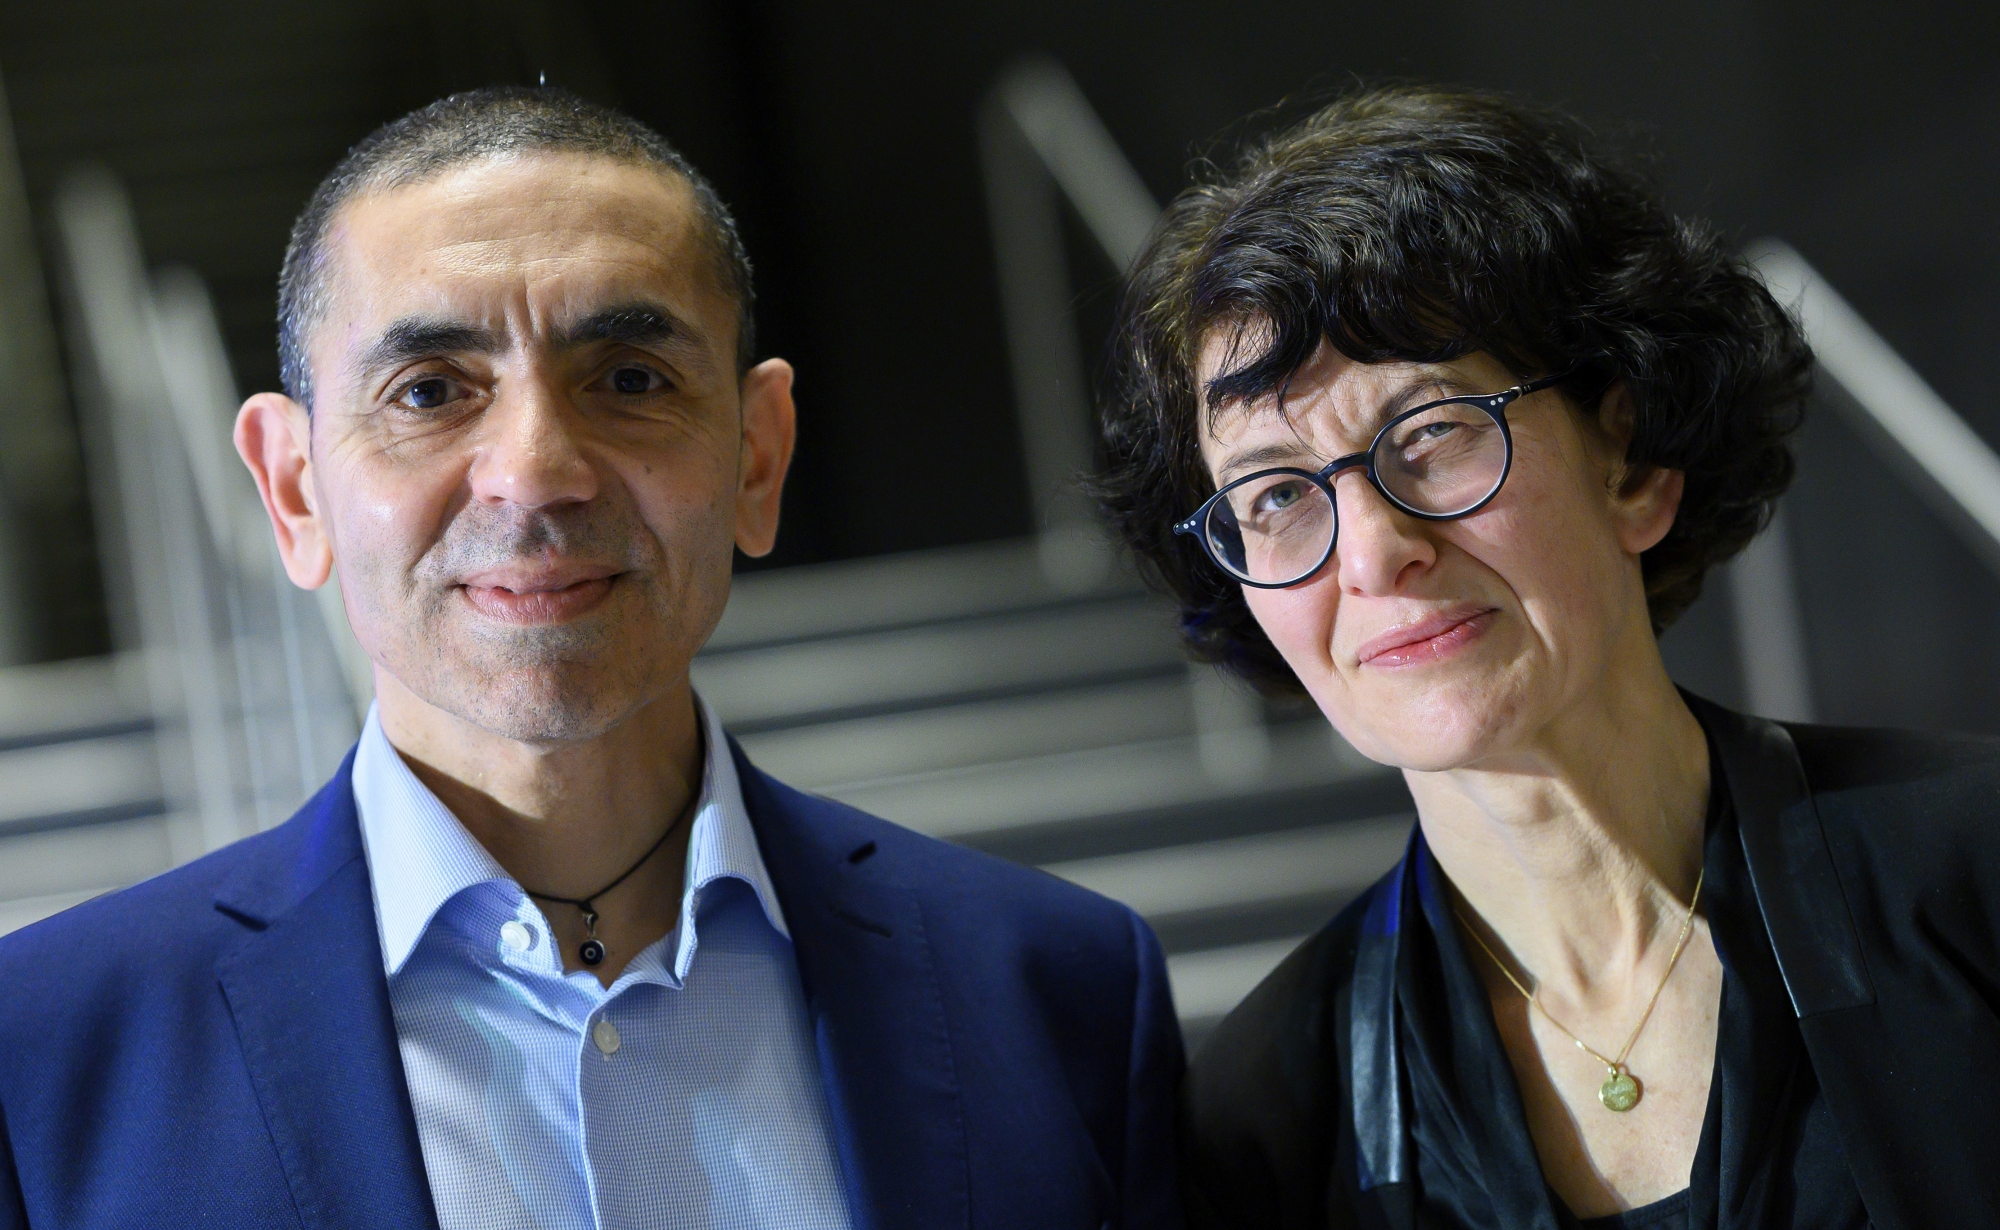 Ugur Sahin, left, with his wife Ozlem Tureci, founders of the coronavirus vaccine developer BioNTech, pose for a photo at an Axel Springer Award ceremony for the research couple broadcast on the Internet, Thursday, March 18, 2021. (Bernd von Jutrczenka/dpa via AP, Pool)